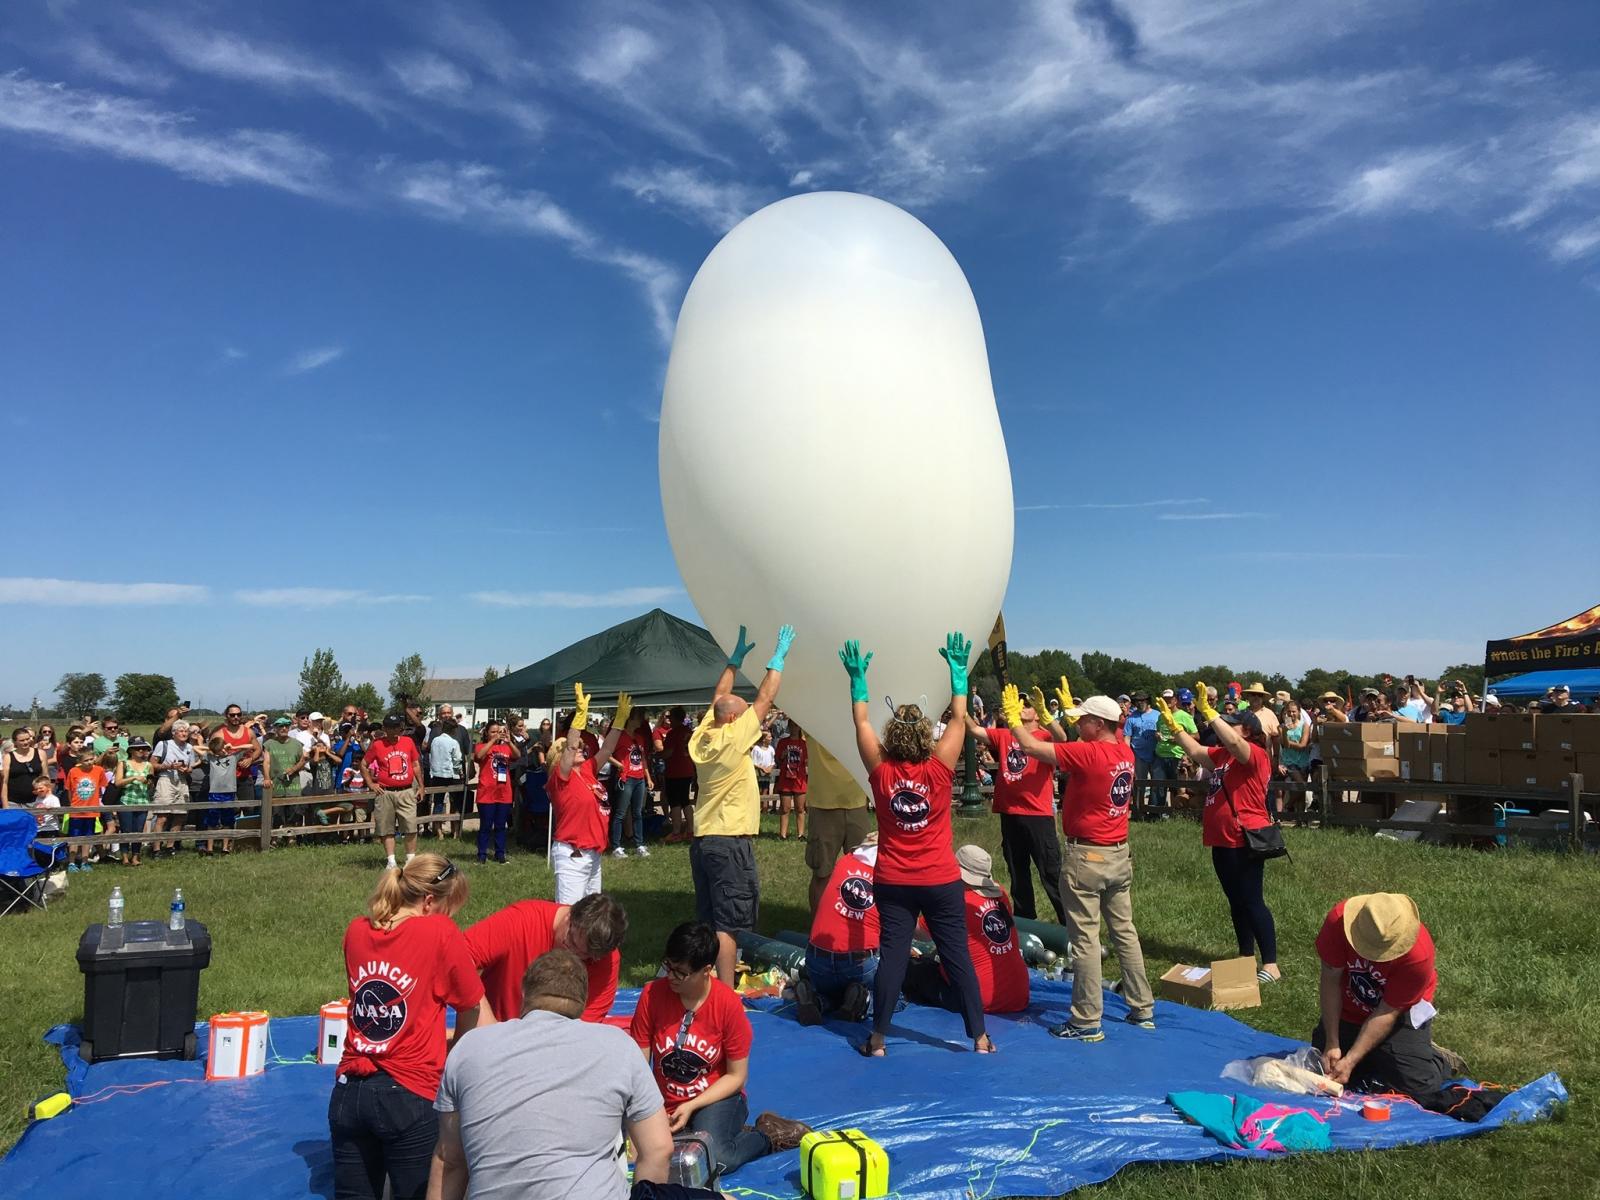 Researchers launch a high altitude balloon